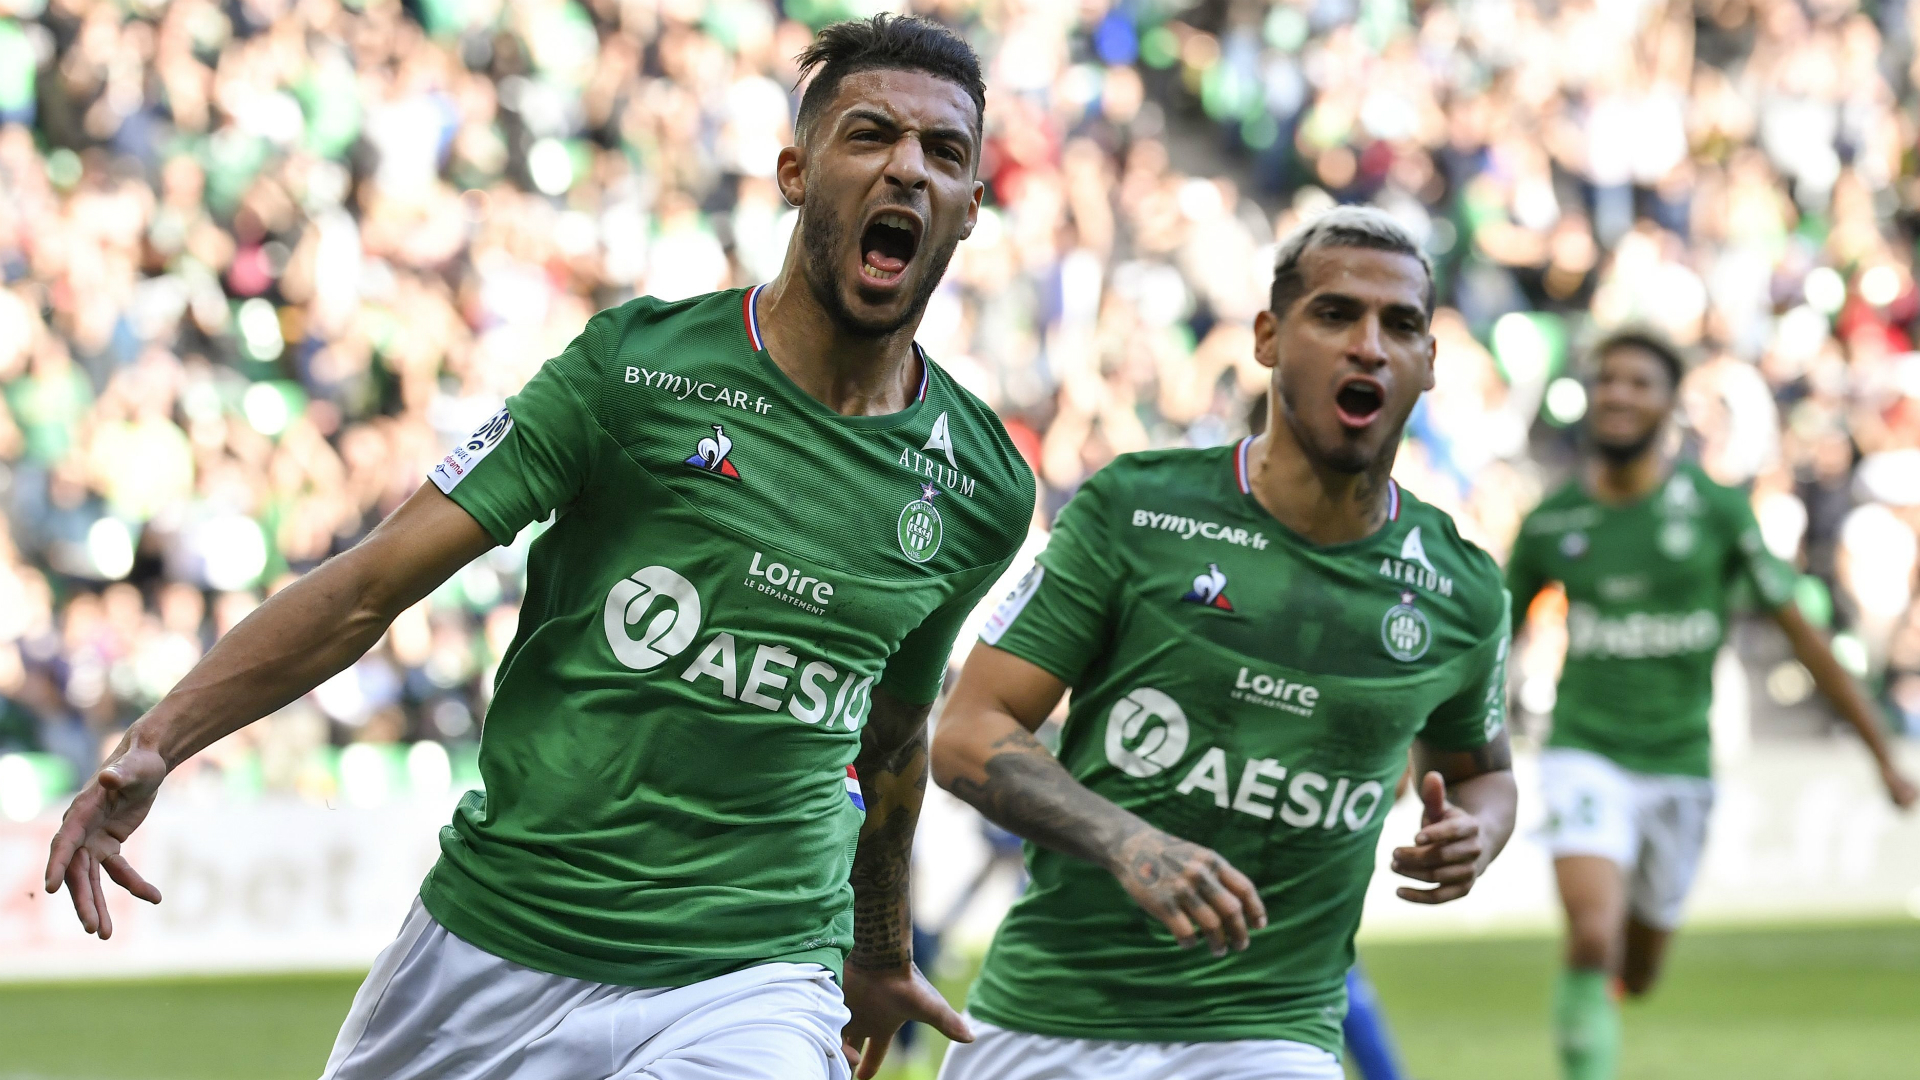 Saint-Etienne won't give up in Ligue 1 relegation fight - Bouanga